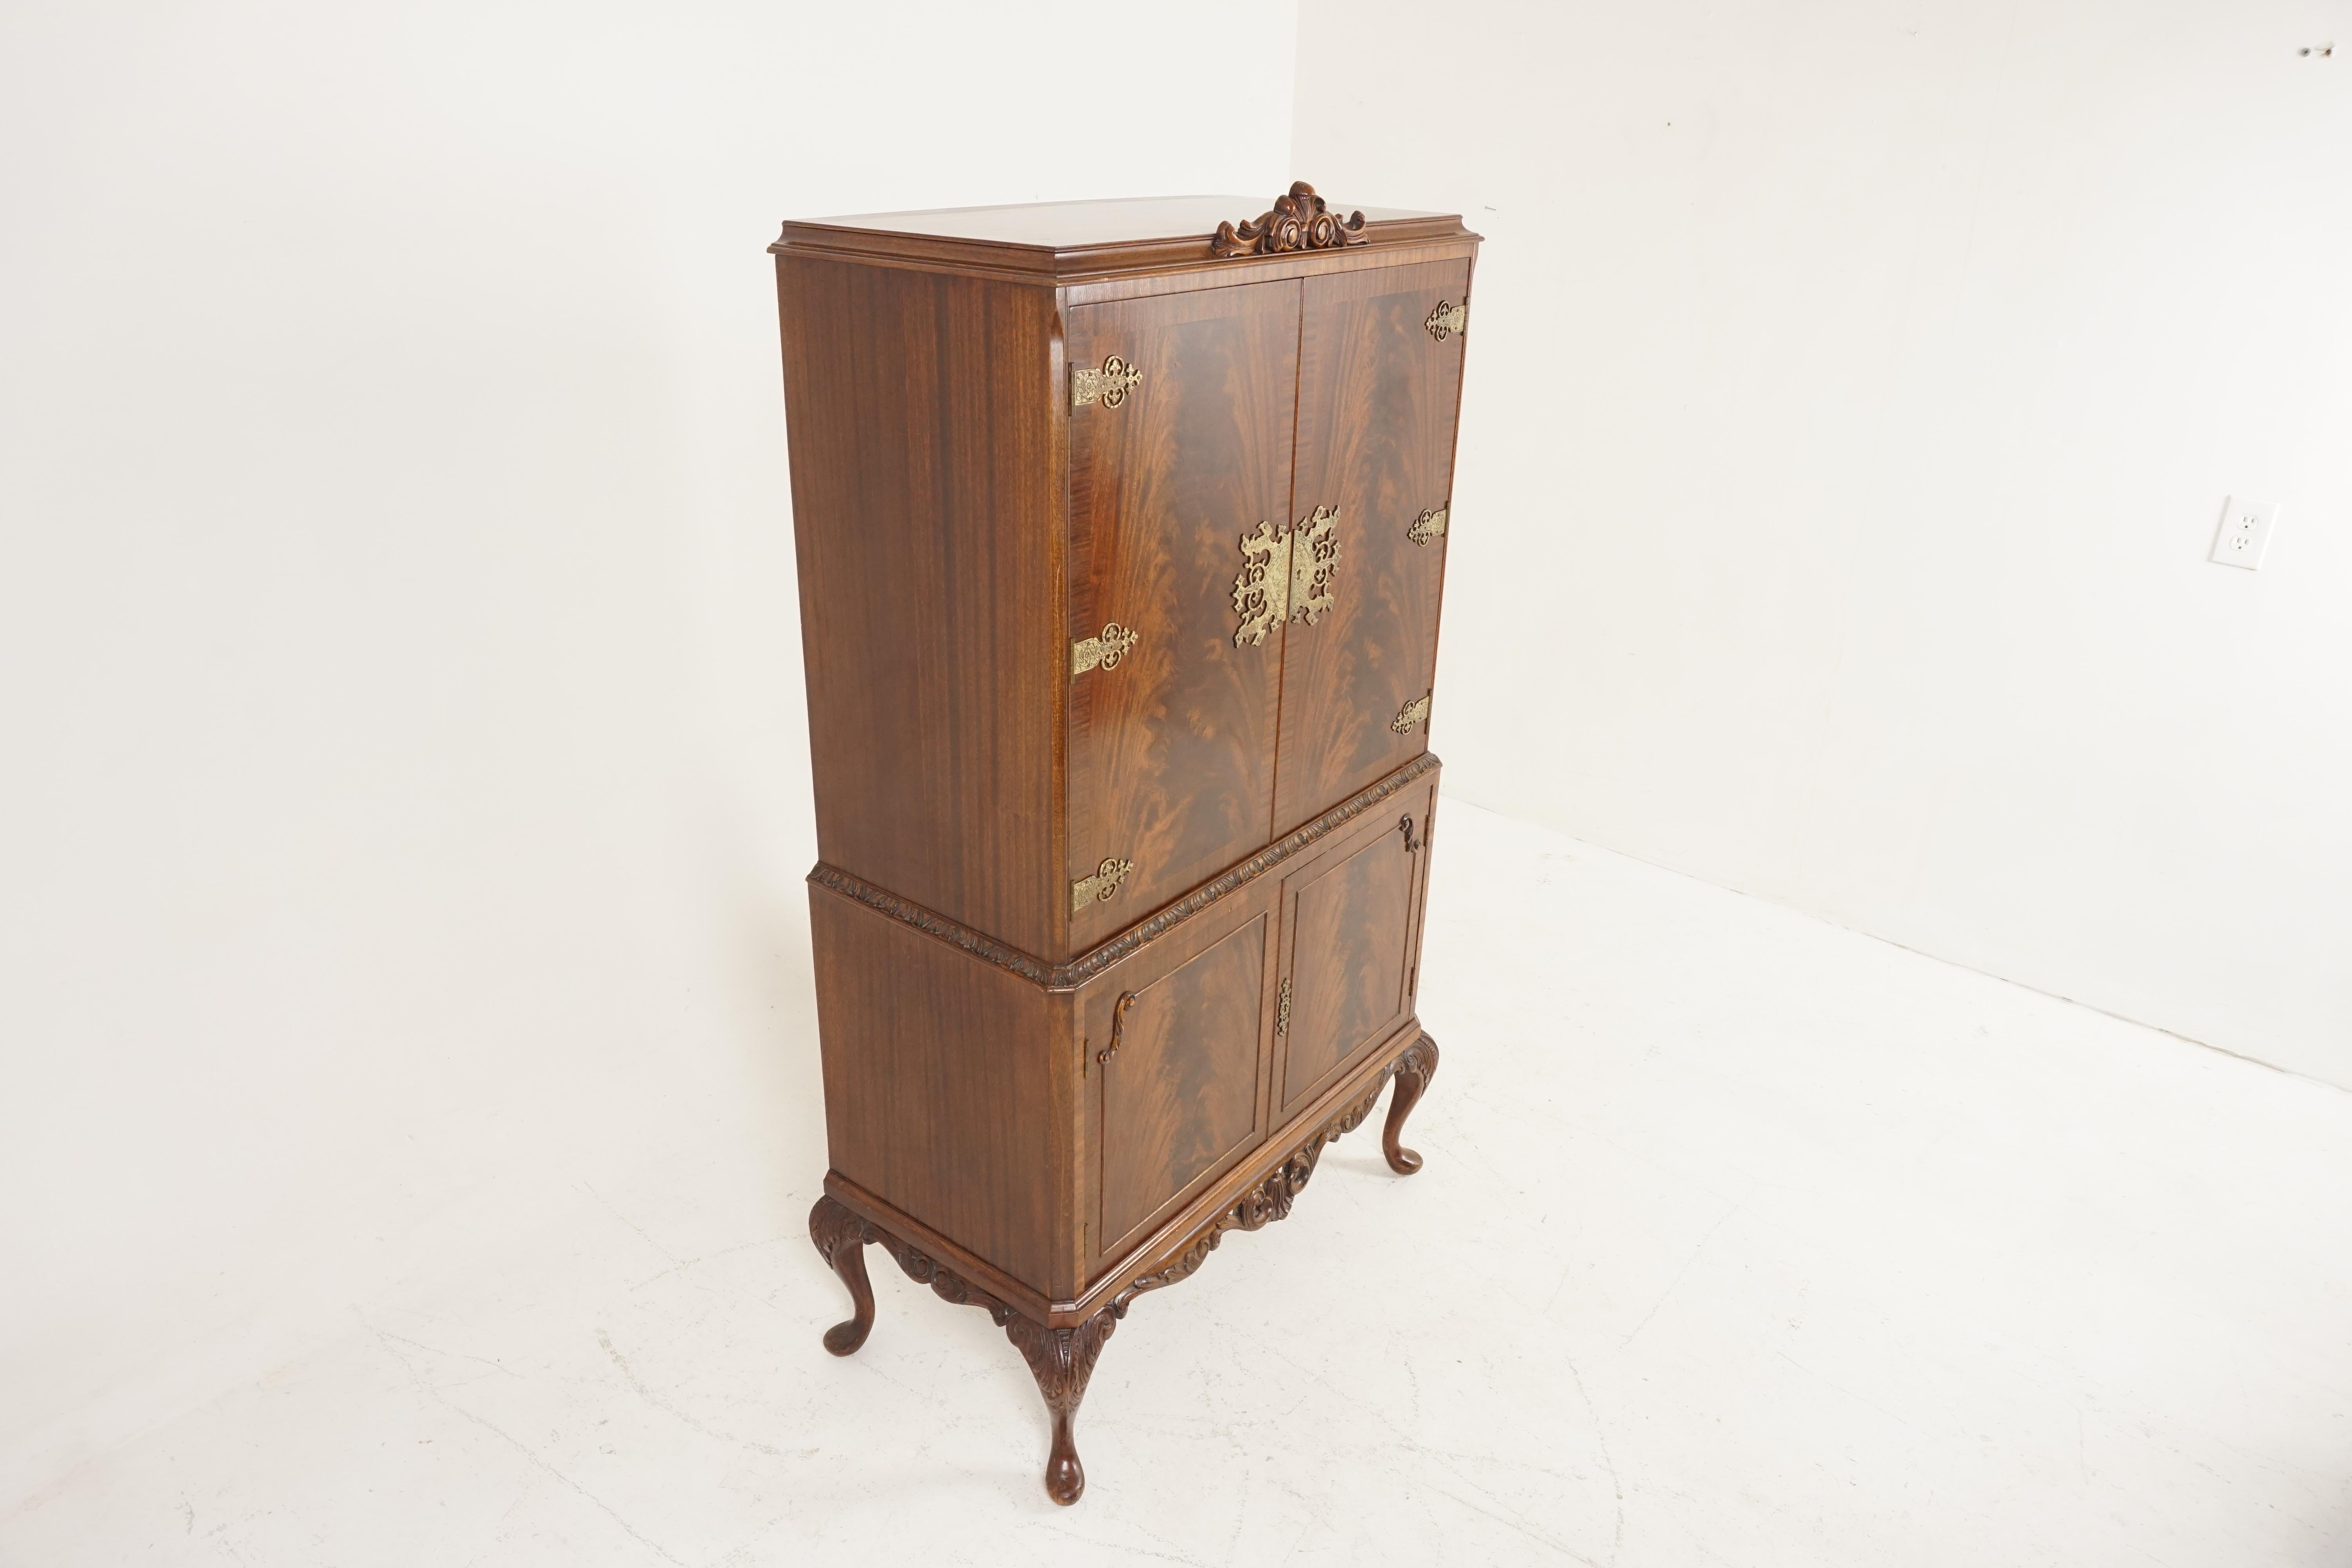 Scottish Antique Cocktail Cabinet, Queen Anne Flame Mahogany, Bar, Drinks Cabinet, B2501